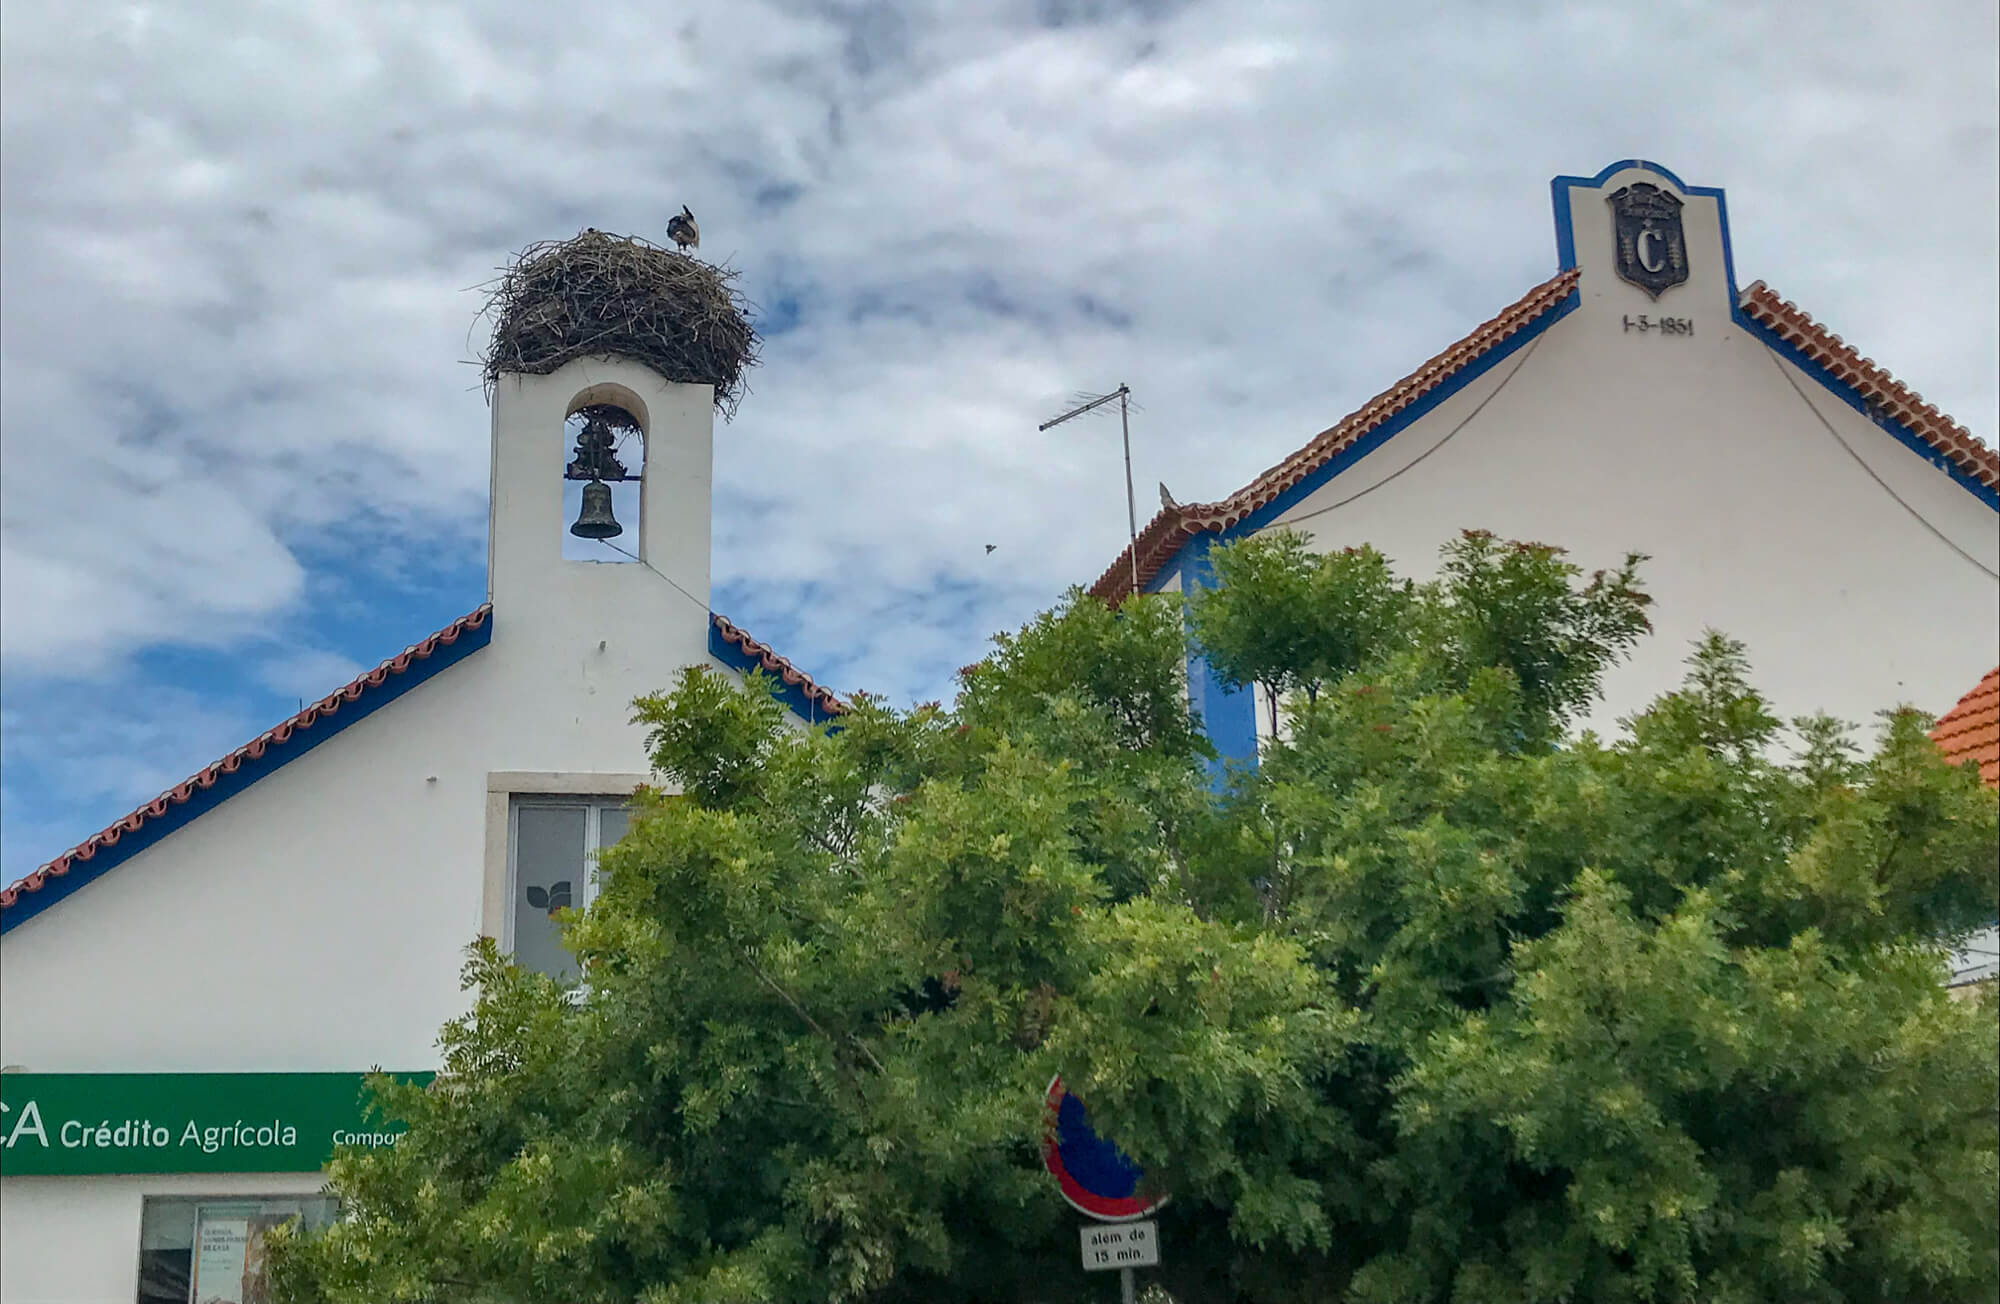 Stork nests in Comporta Portugal